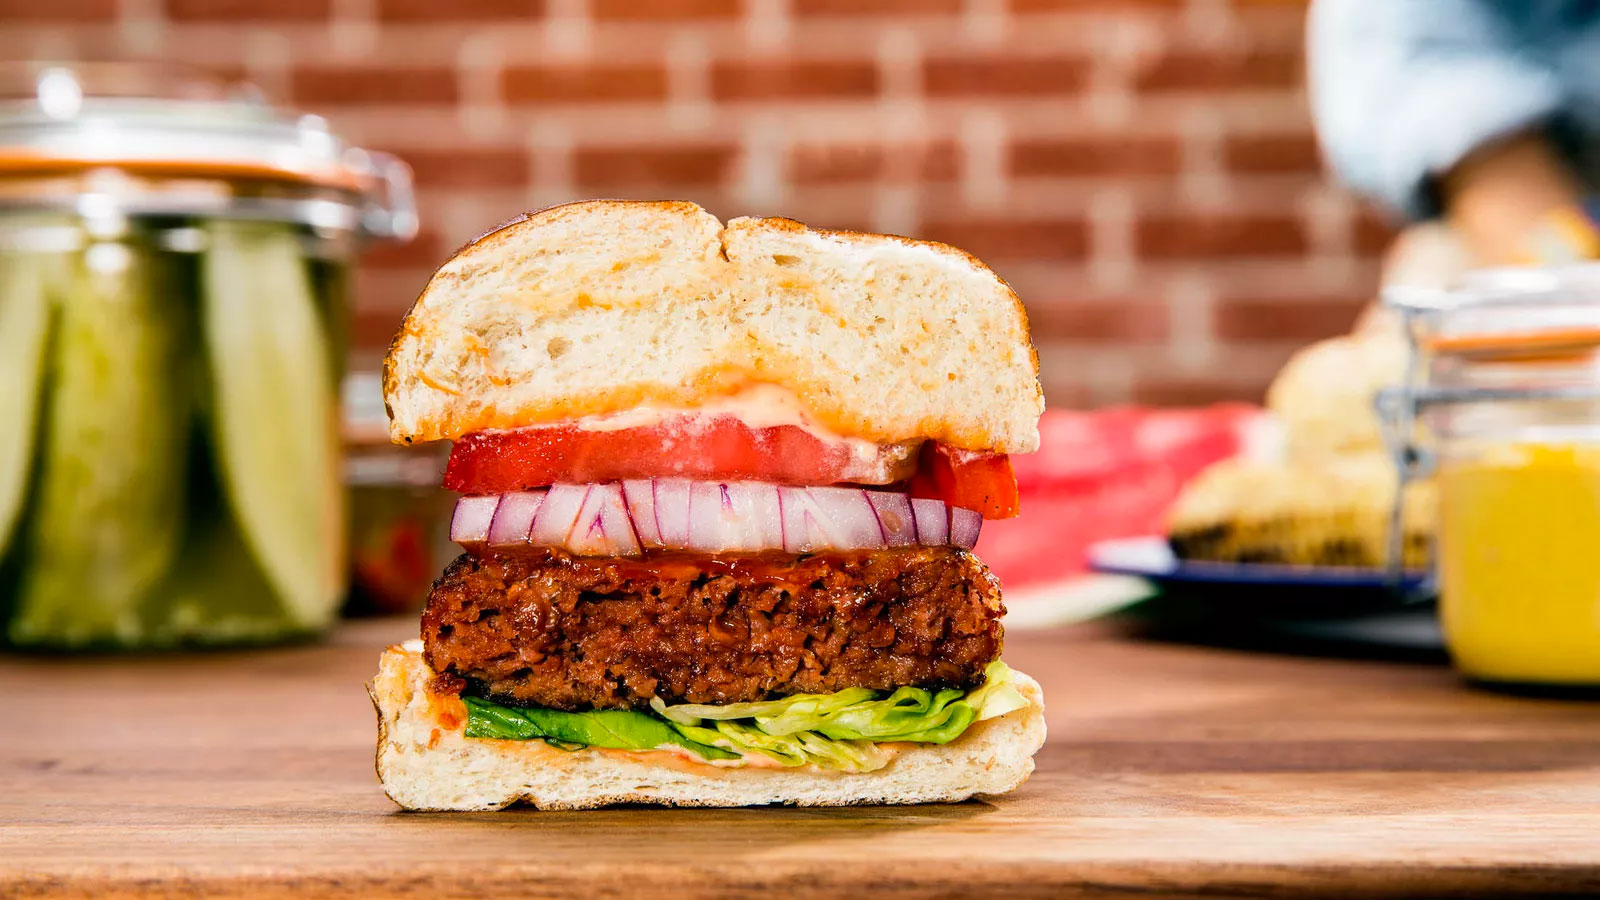 🥗 How Many of These Healthy Food Trends Have You Tried? Beyond Meat Burger